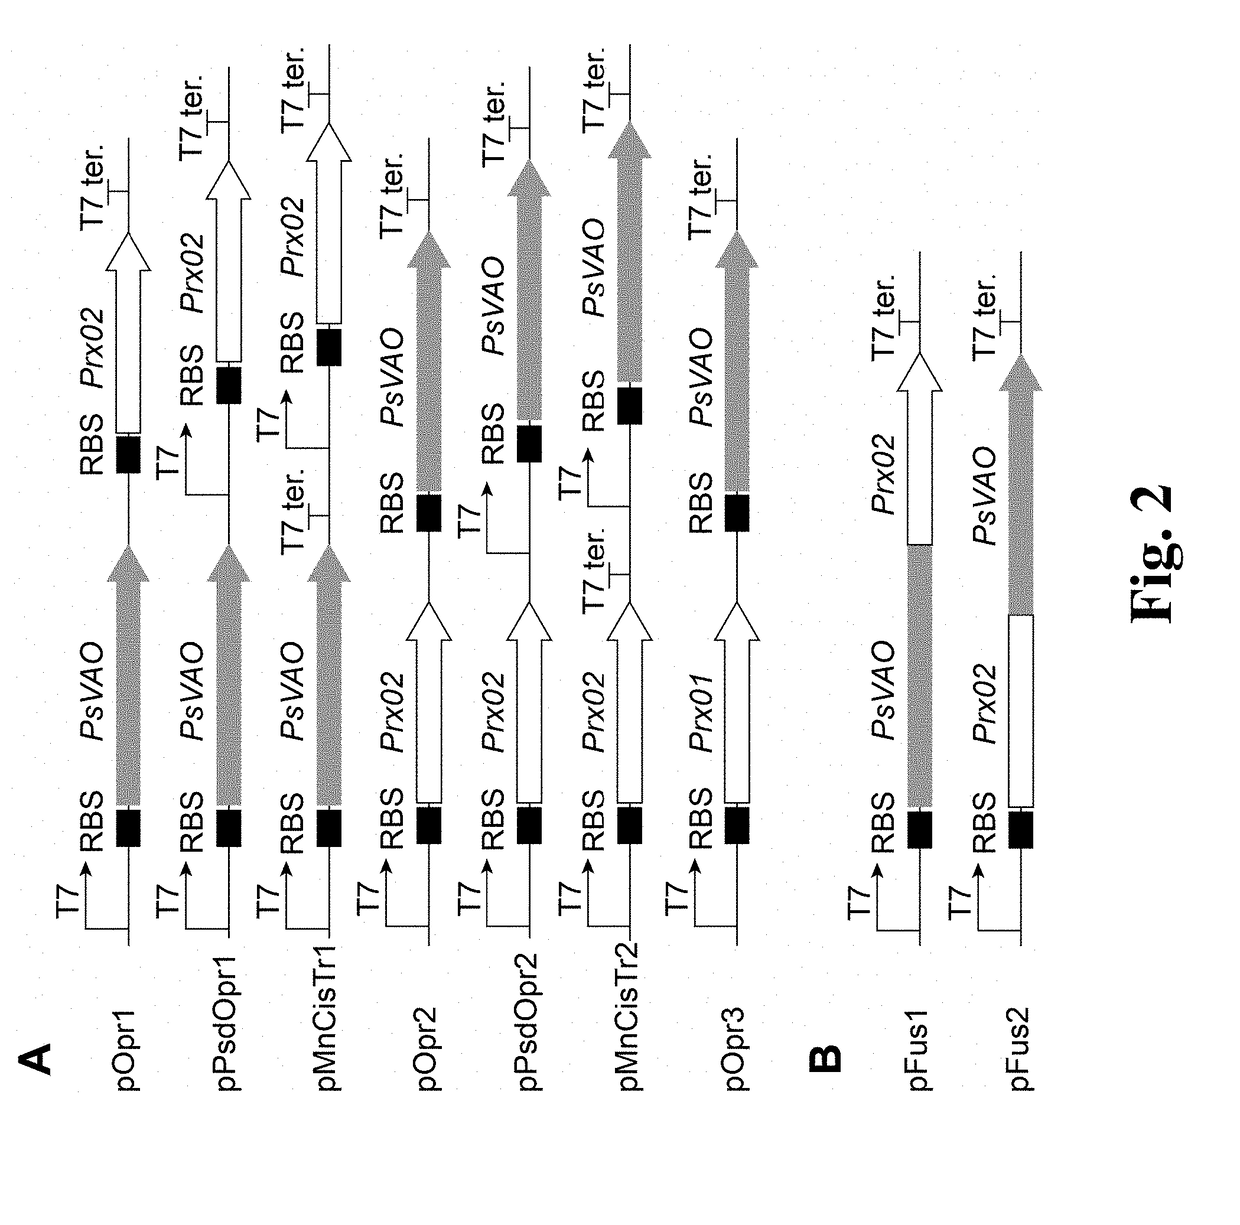 Method for High-efficiency Production of Pinoresinol Using an H2O2 Auto-scavenging Cascade